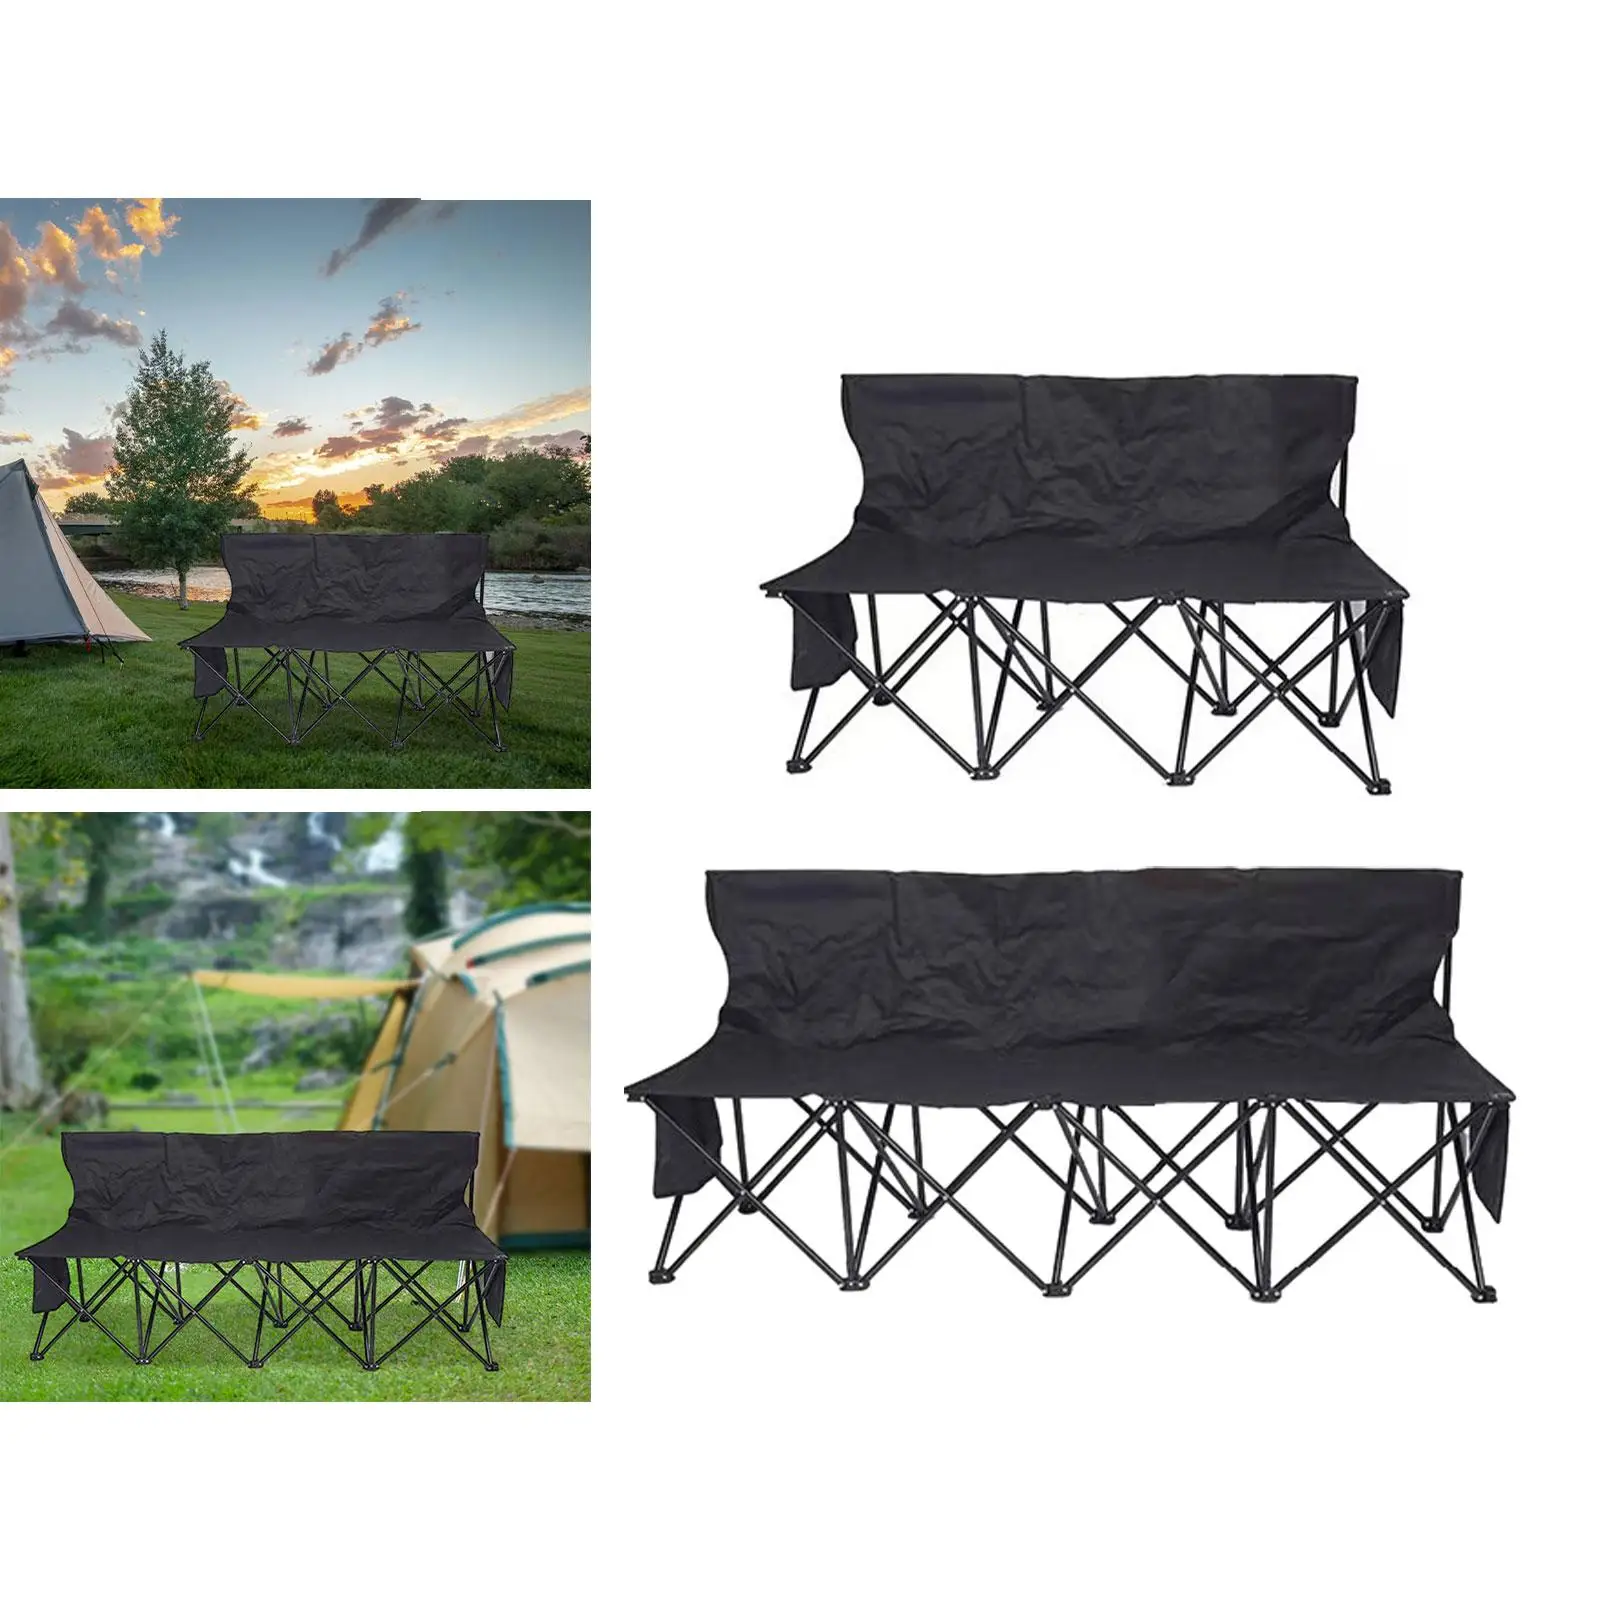 Folding Bench Seating with Backrest for Sports Team Portable Sports Bench for Campsites Soccer Games Outdoor Beach Picnic